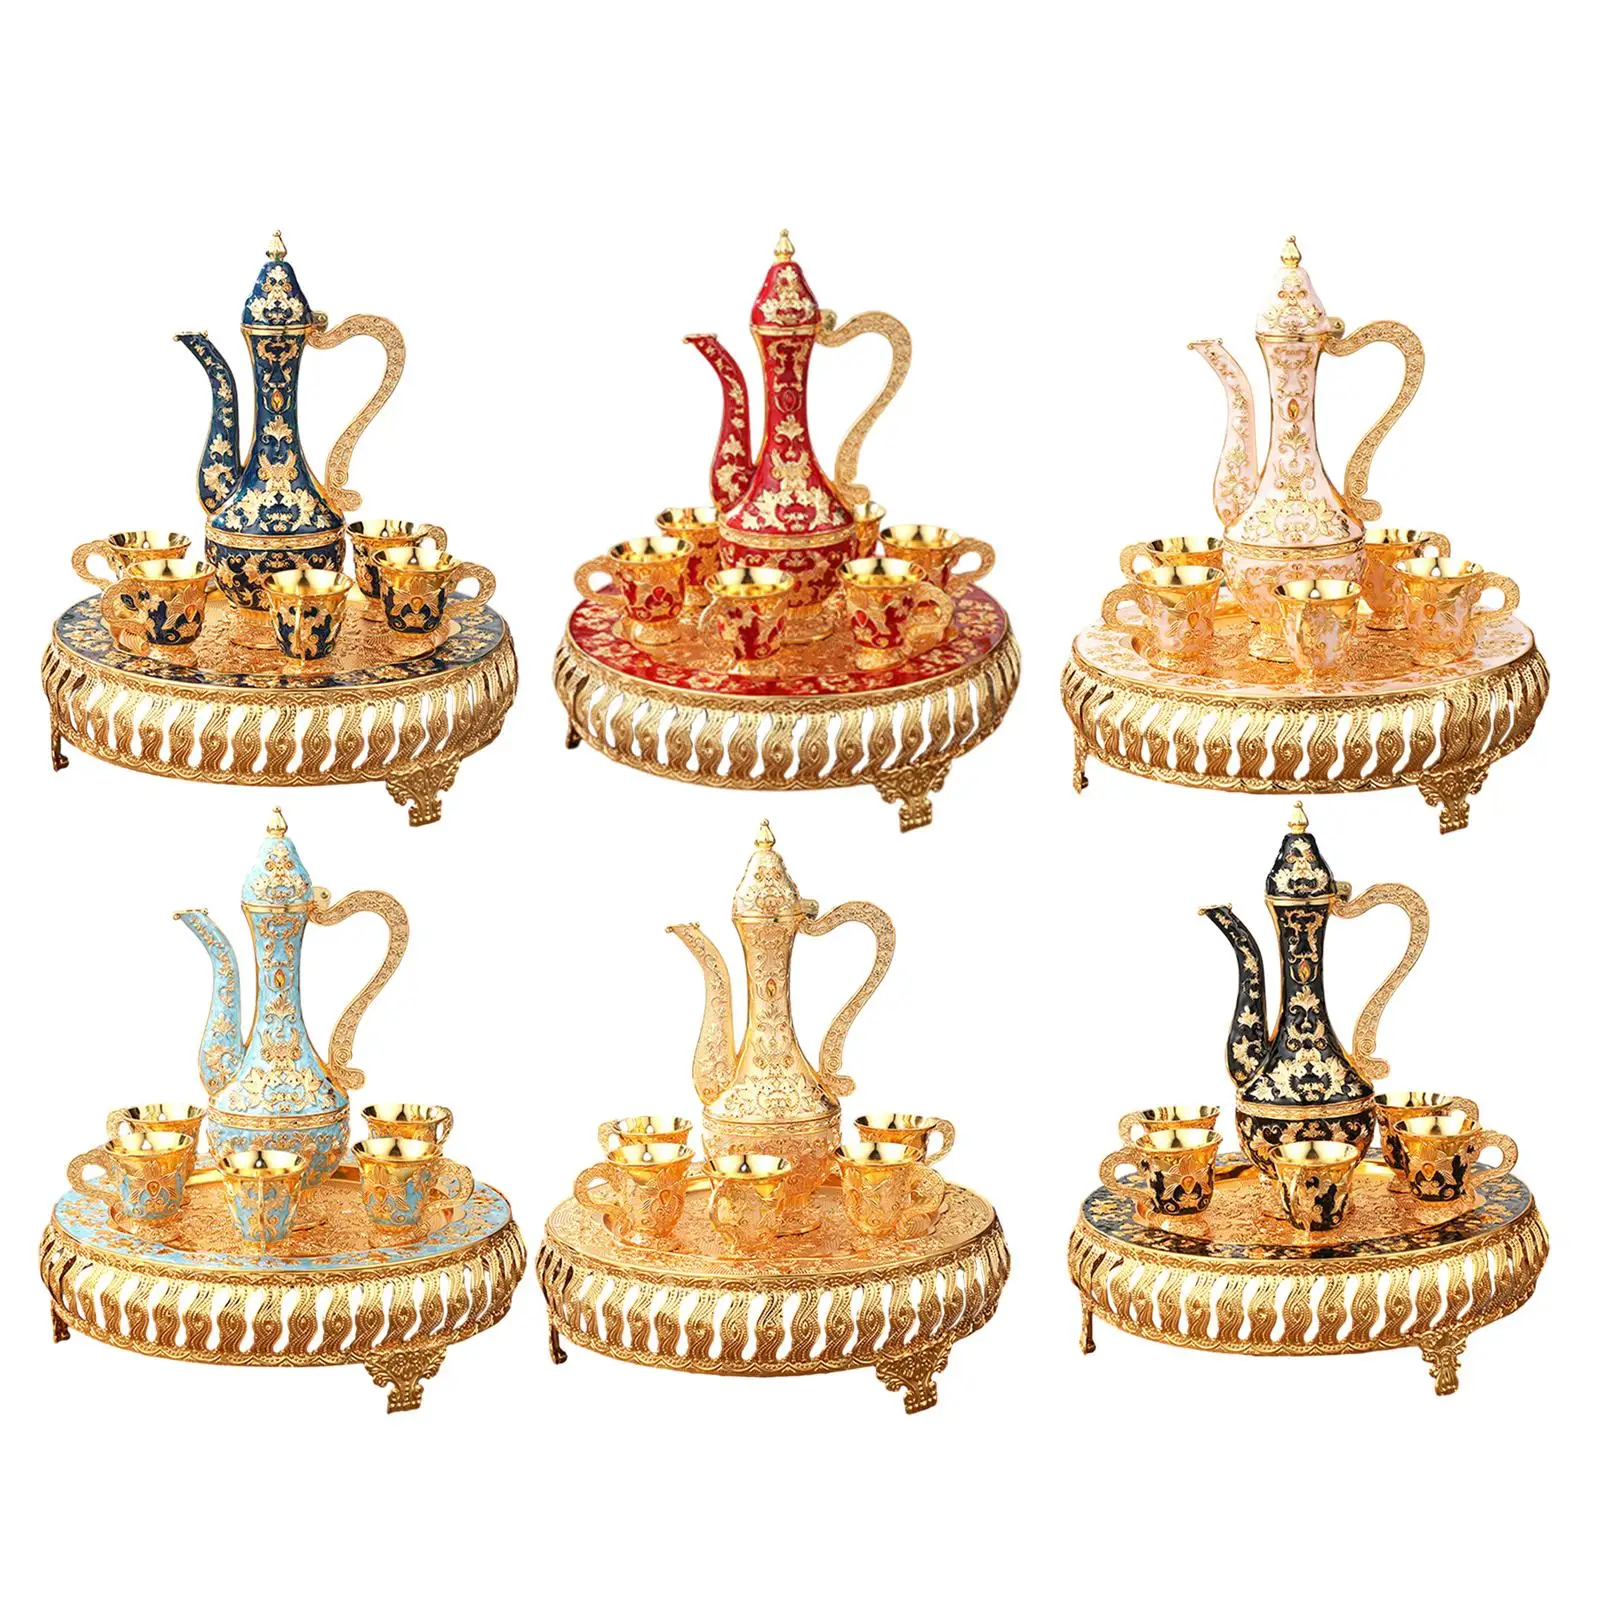 Turkish Coffee Pot Set Vintage Style with Drinking Cups Serving Set for Living Room Party Home Dining Table Decoration